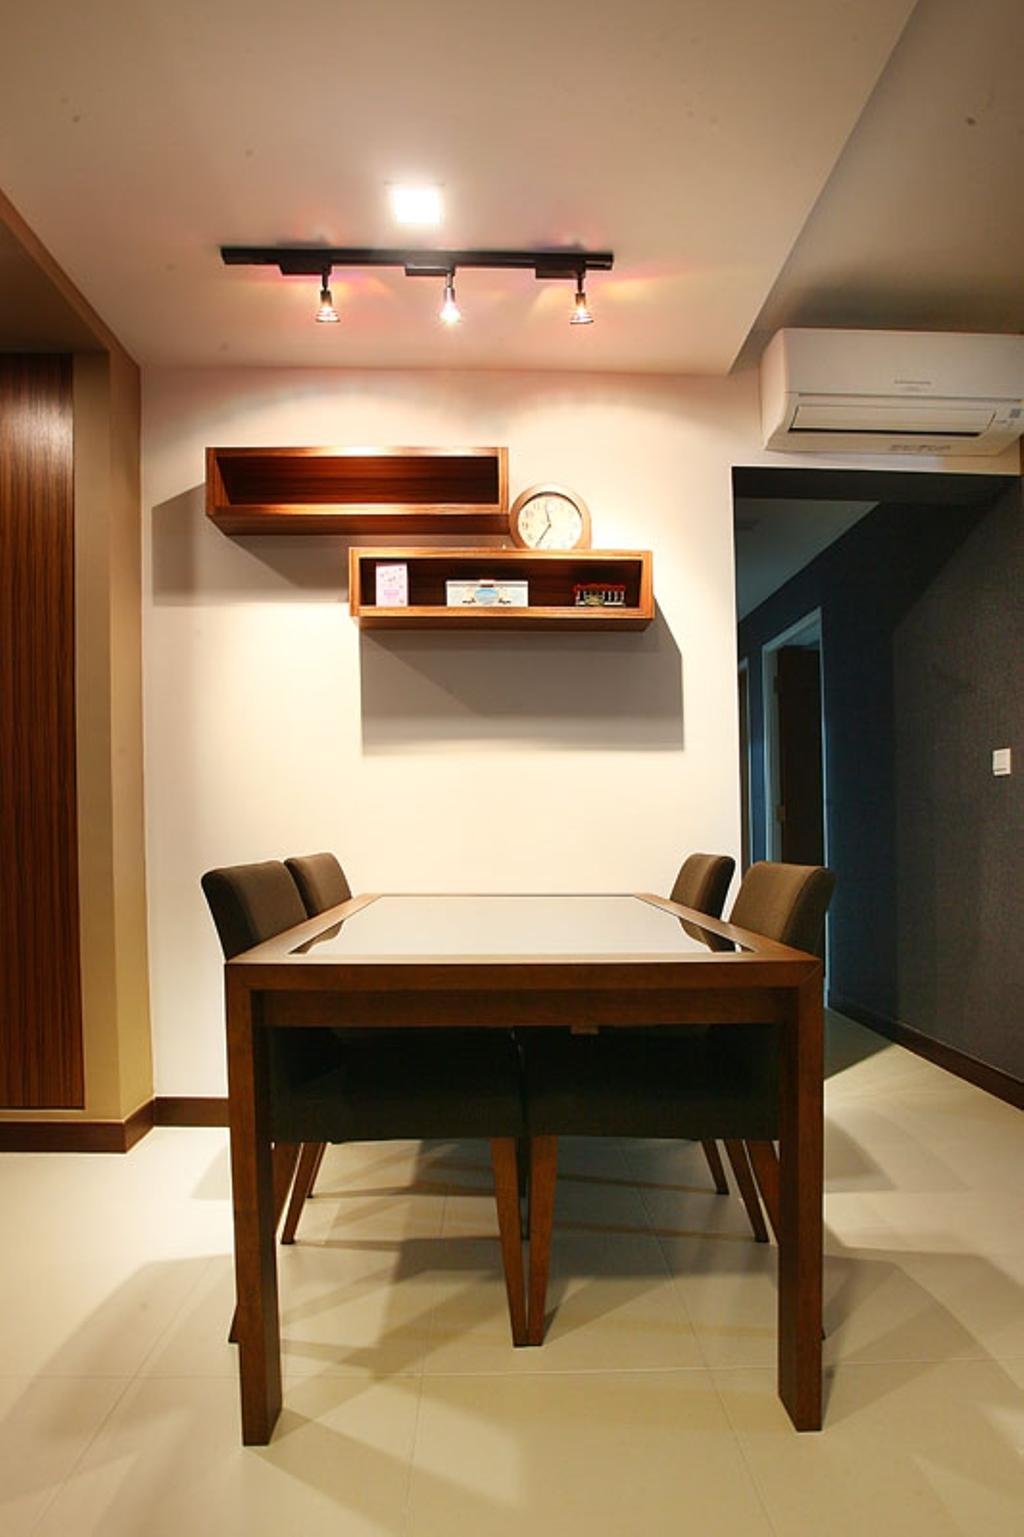 Transitional, HDB, Dining Room, Buangkok Green, Interior Designer, Fineline Design, Black Track Lights, Track Lighting, Wall Shelves, Shelves, Shelving, Dining Table, Dining Chairs, Chairs, Aircon, Couch, Furniture, Chair